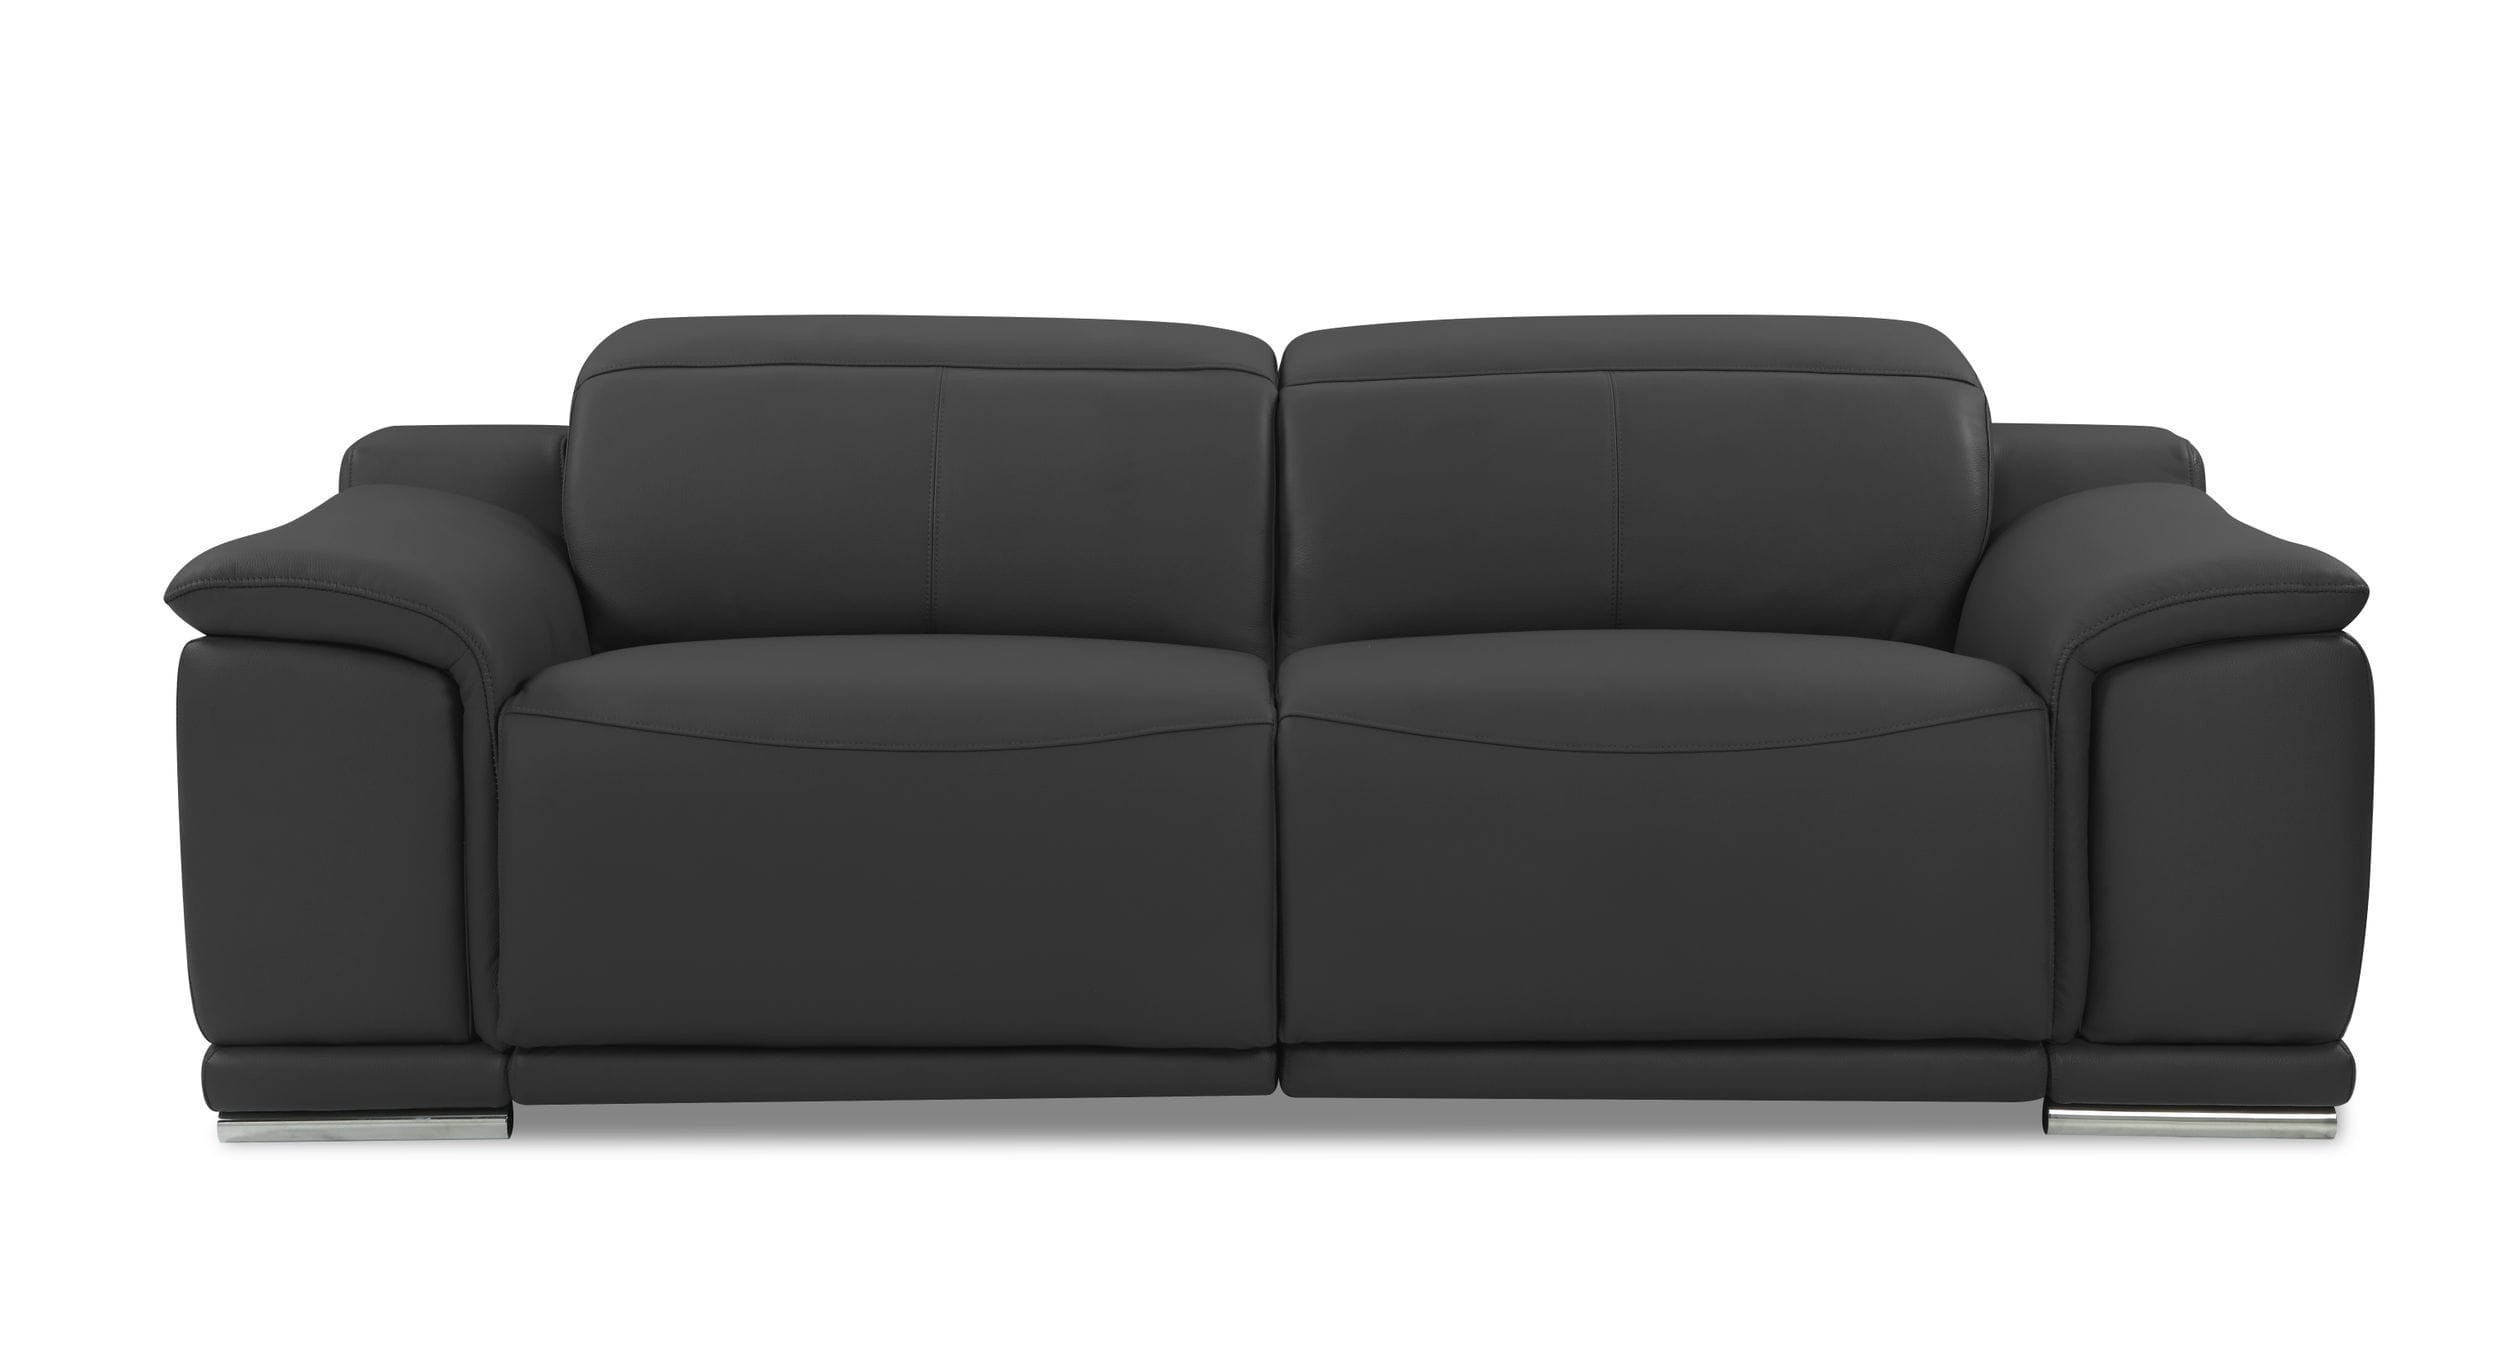 grey leather low back reclining sofa